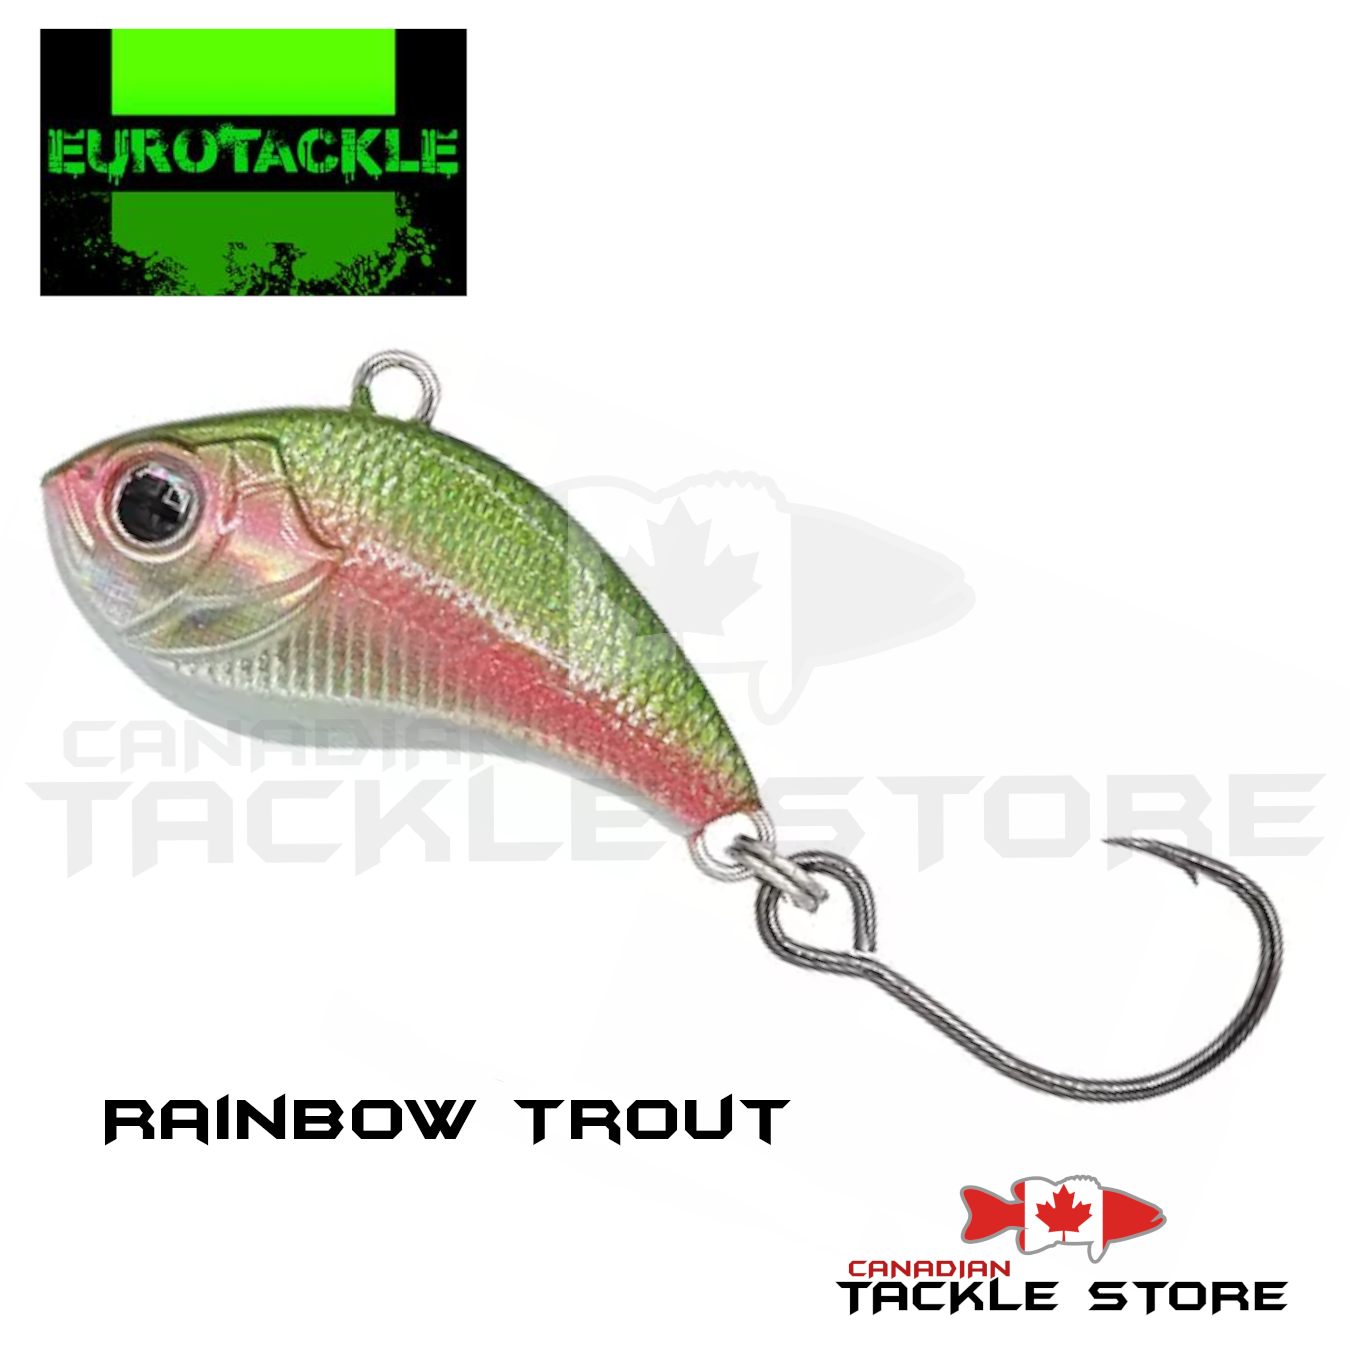 Eurotackle – Canadian Tackle Store